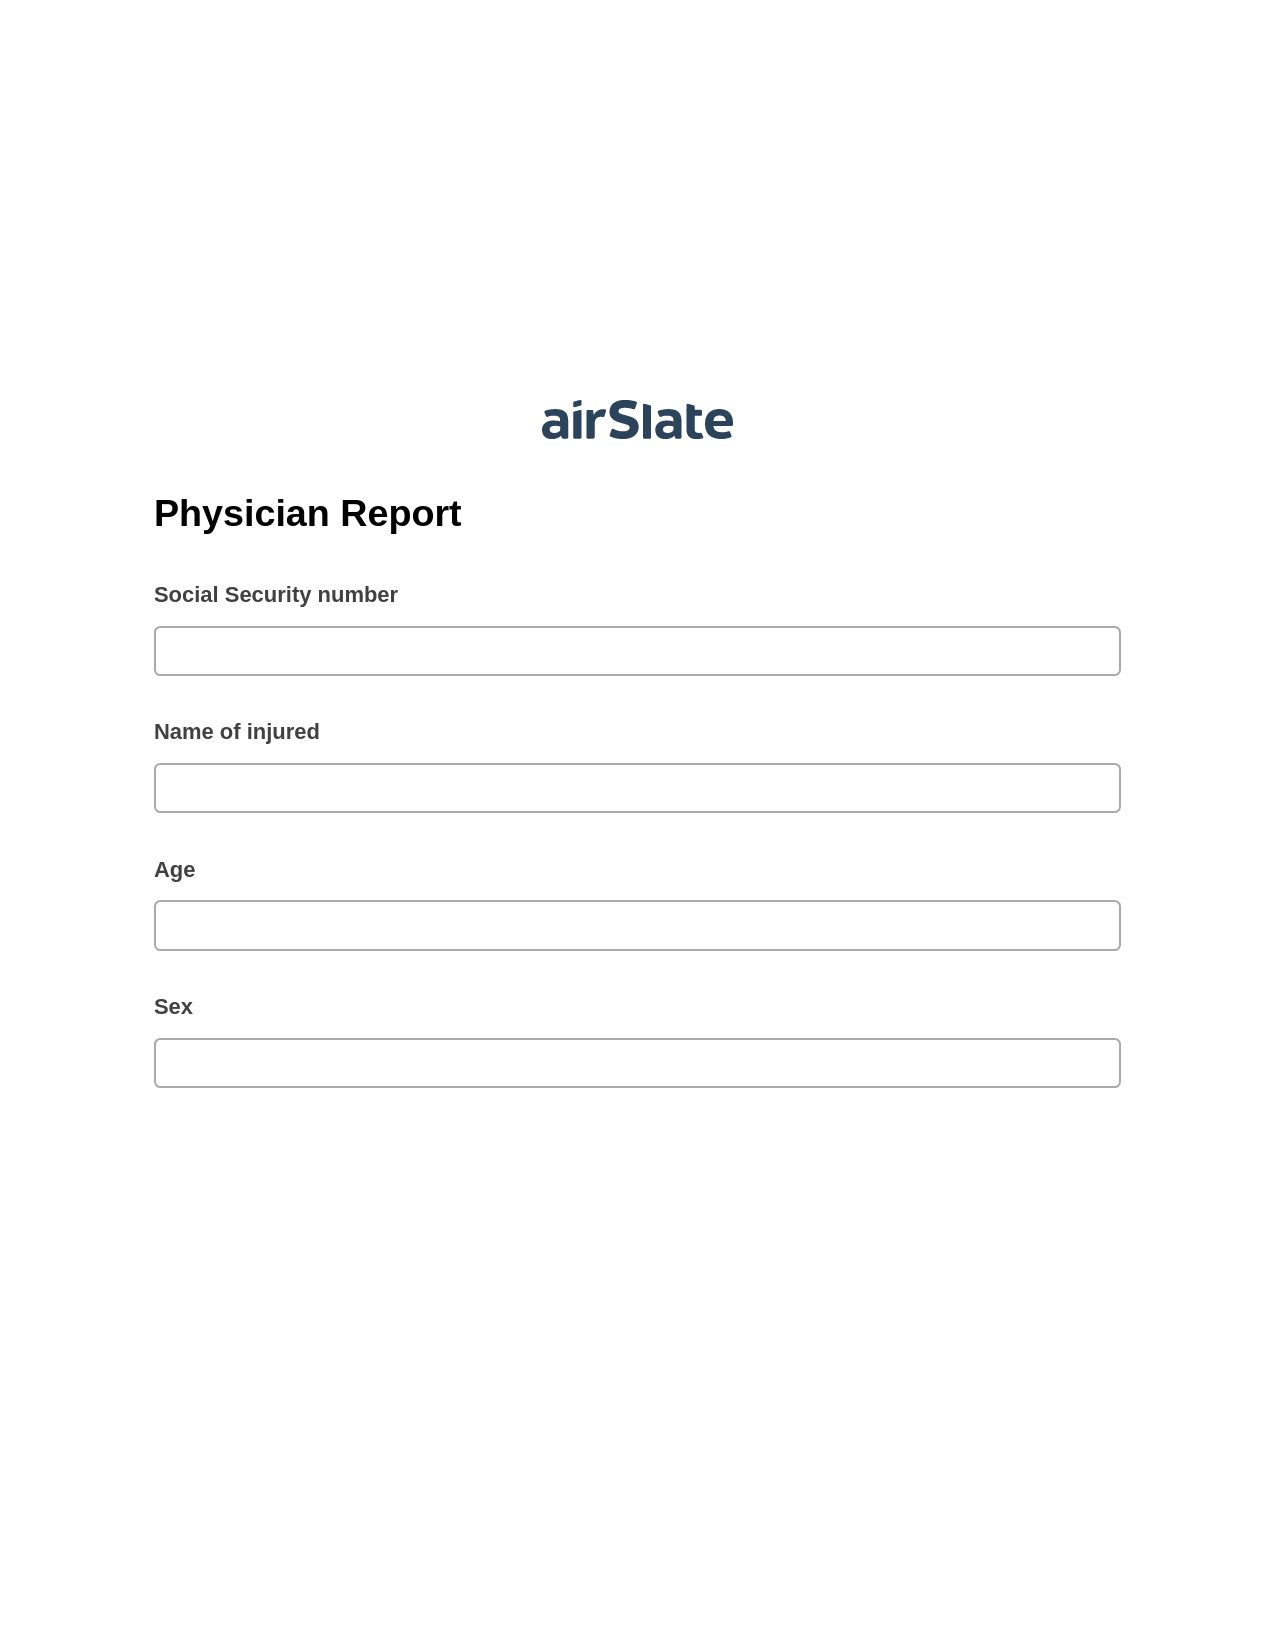 Physician Report Prefill from NetSuite records, Create NetSuite Record bot, Archive to Google Drive Bot